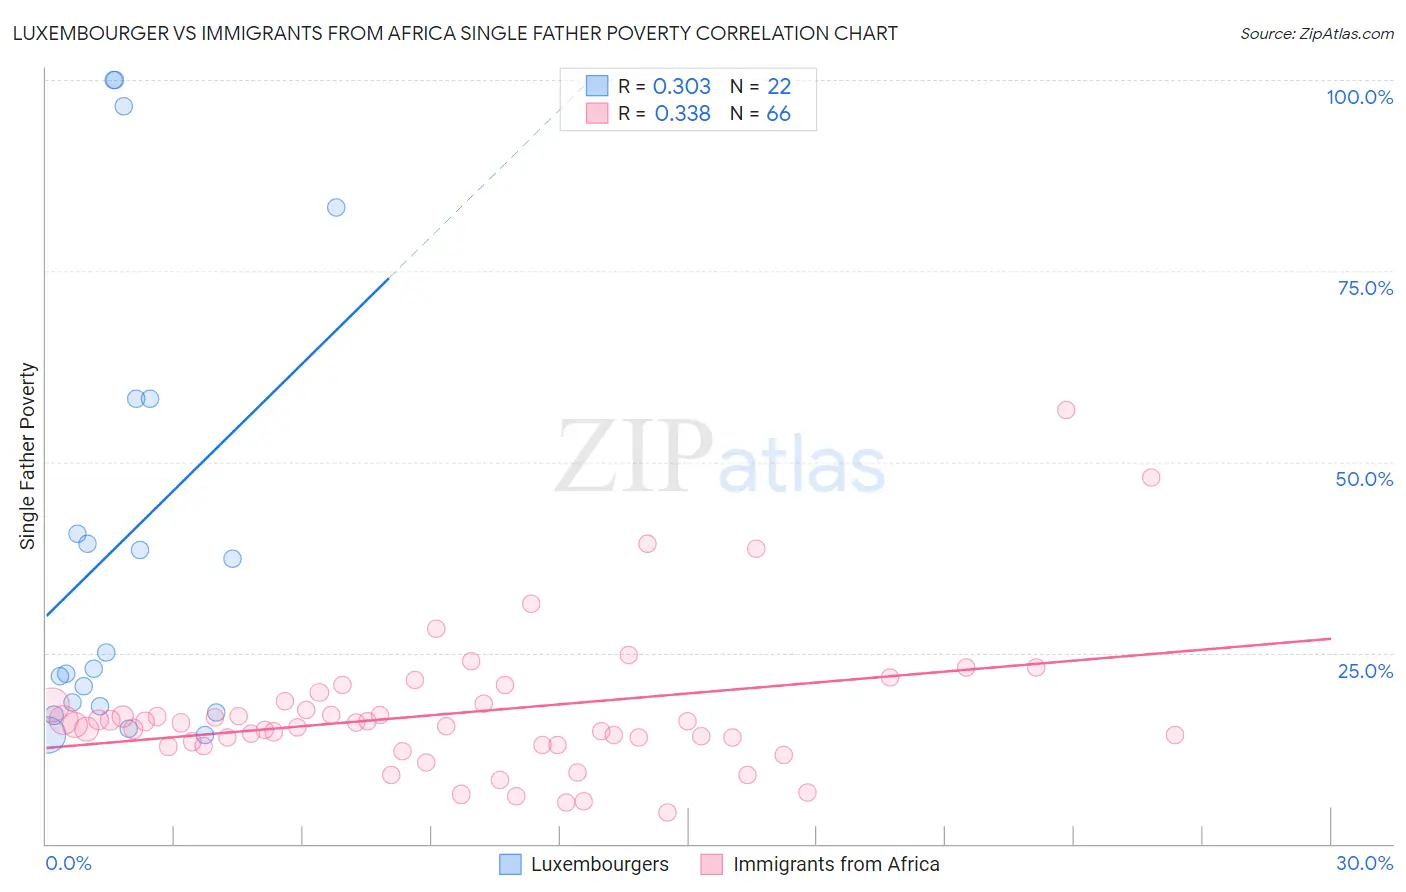 Luxembourger vs Immigrants from Africa Single Father Poverty